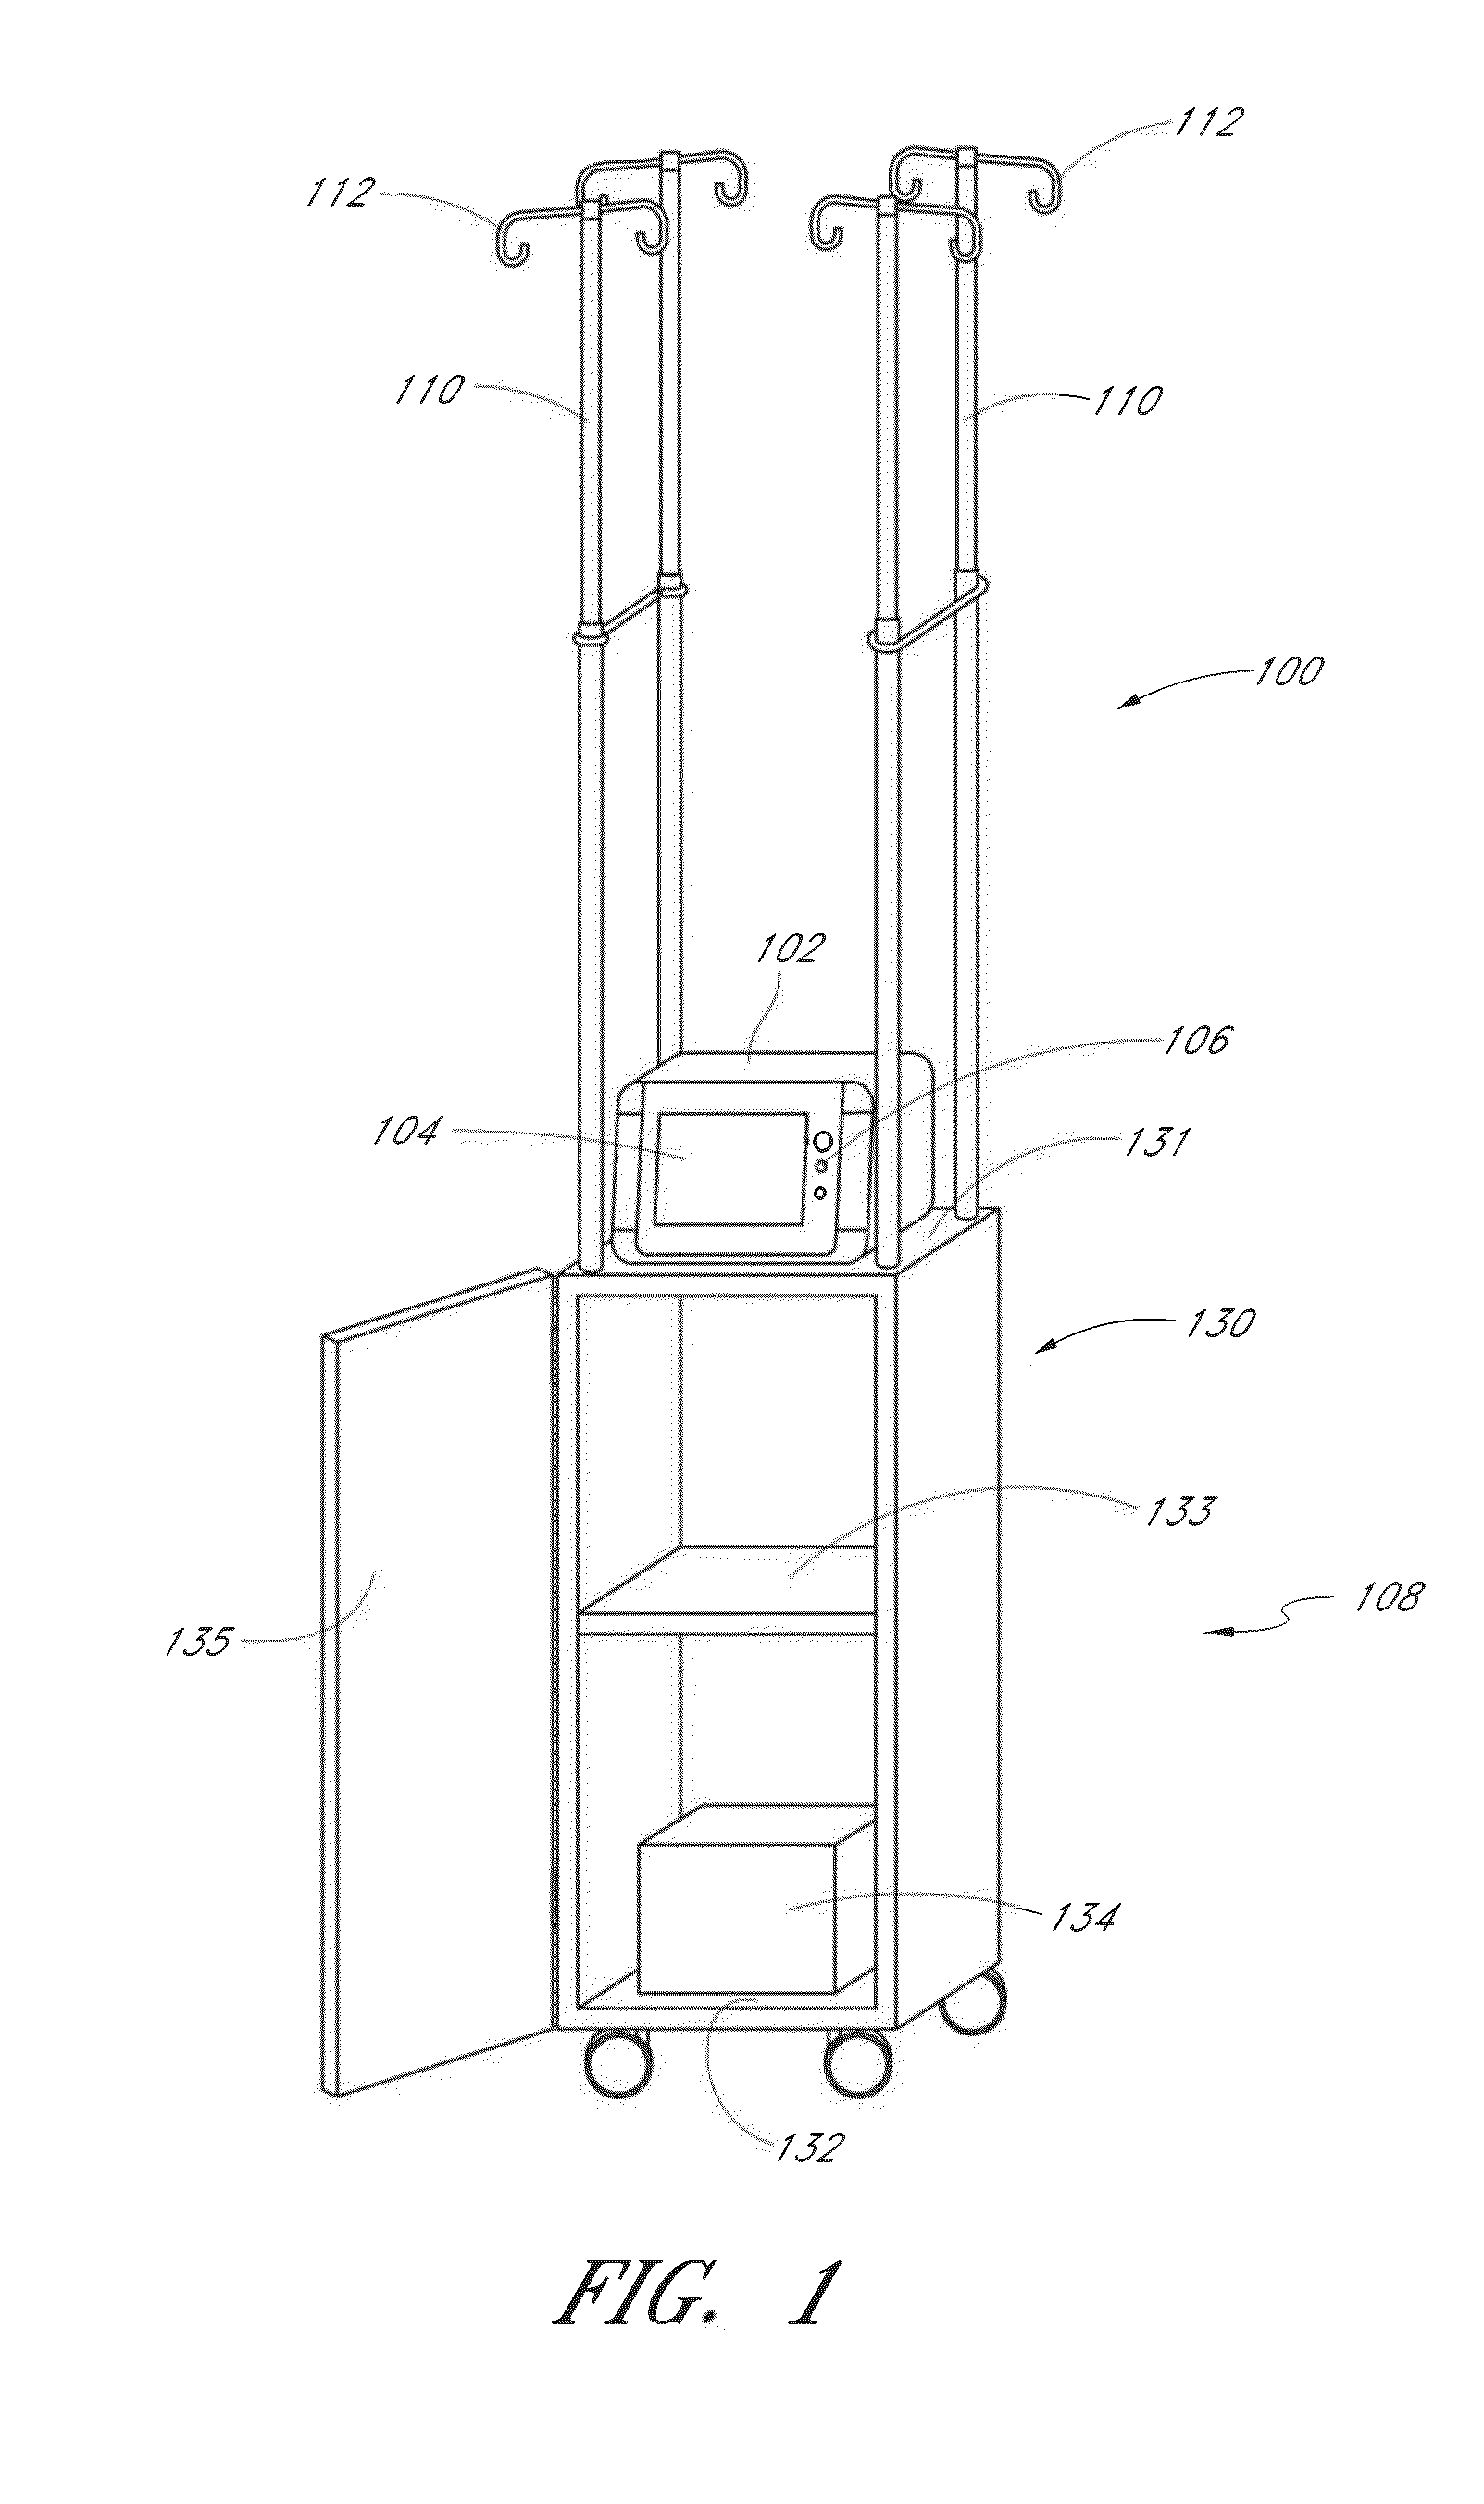 Method and apparatus for analyte measurement, display, and annotation